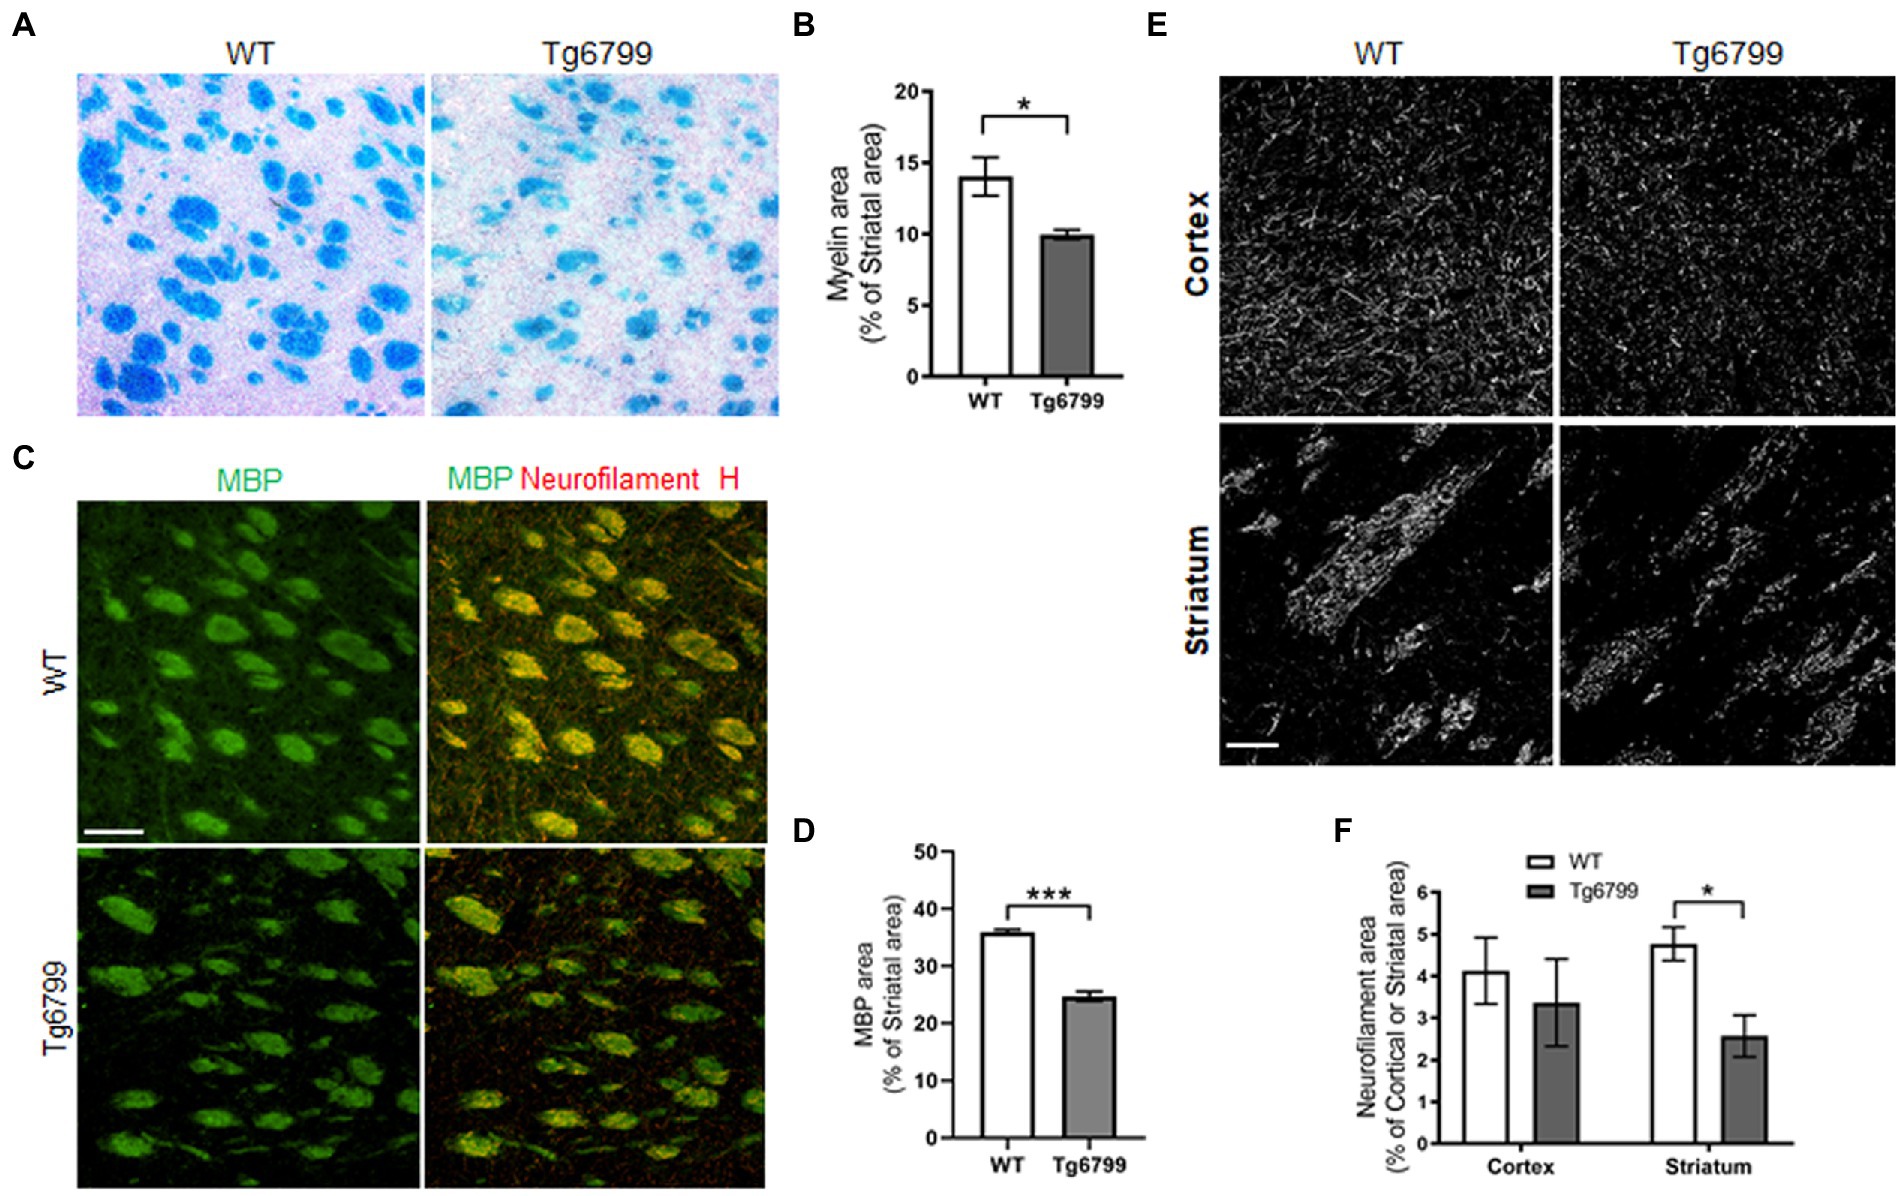 Frontiers  Striatal fibrinogen extravasation and vascular degeneration  correlate with motor dysfunction in an aging mouse model of Alzheimer's  disease